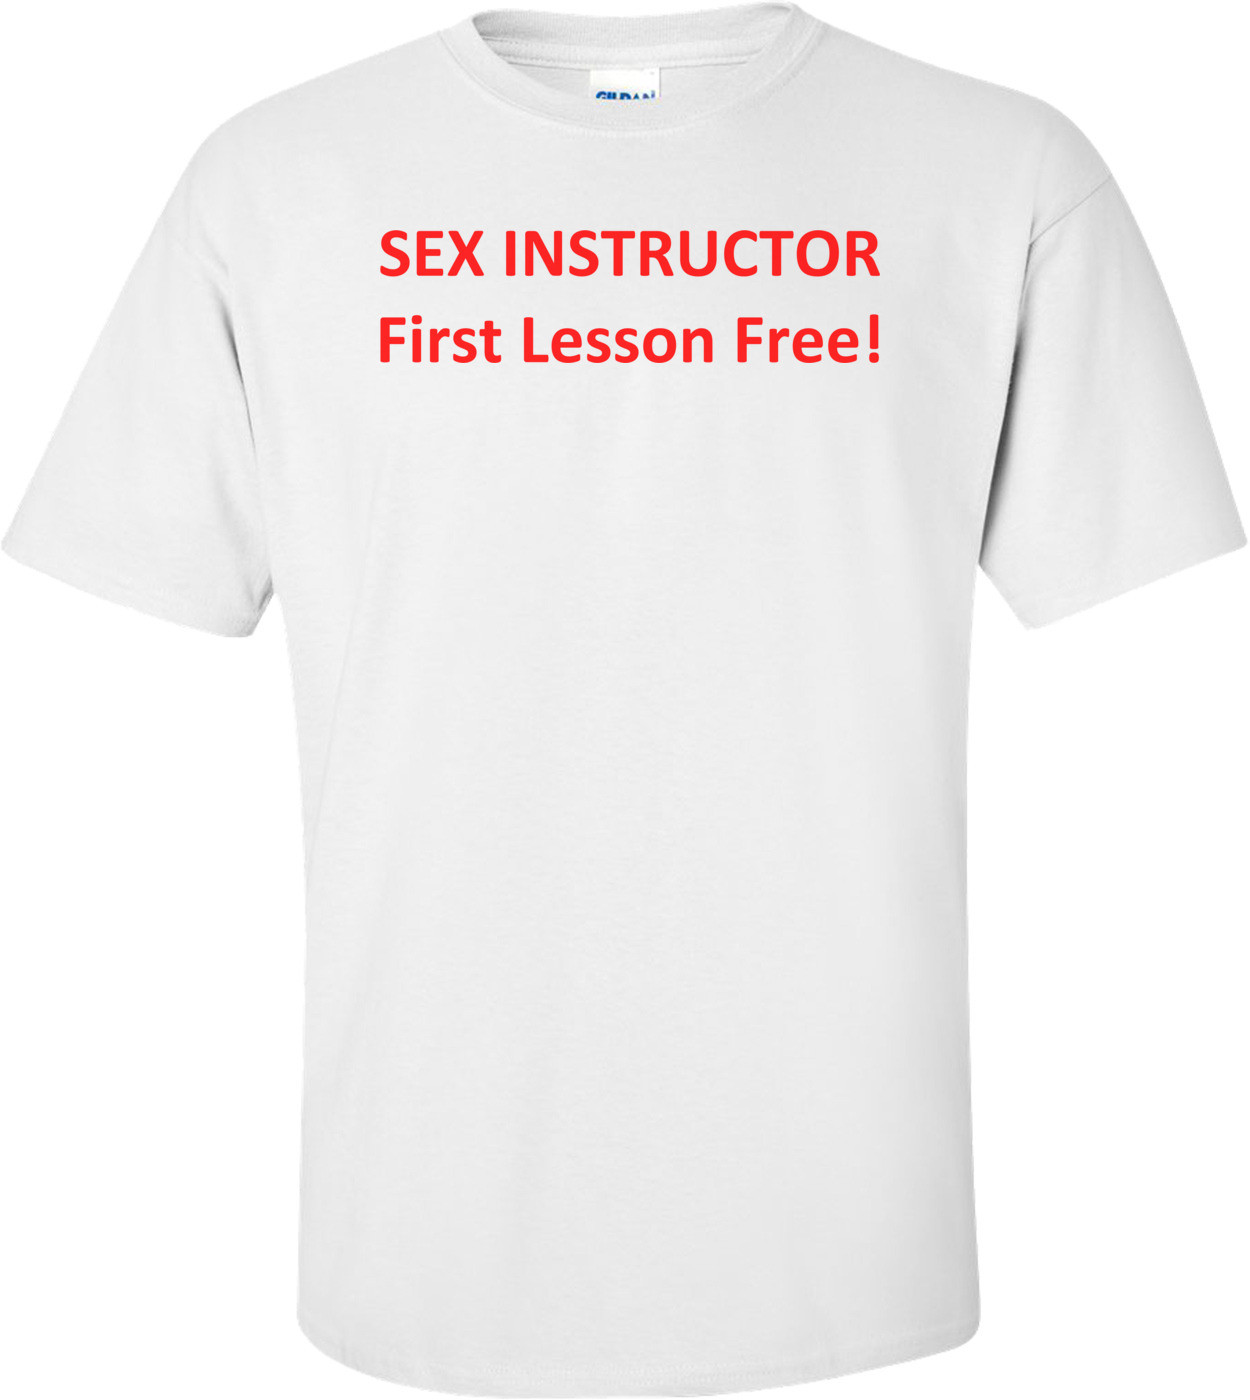 SEX INSTRUCTOR First Lesson Free! Shirt